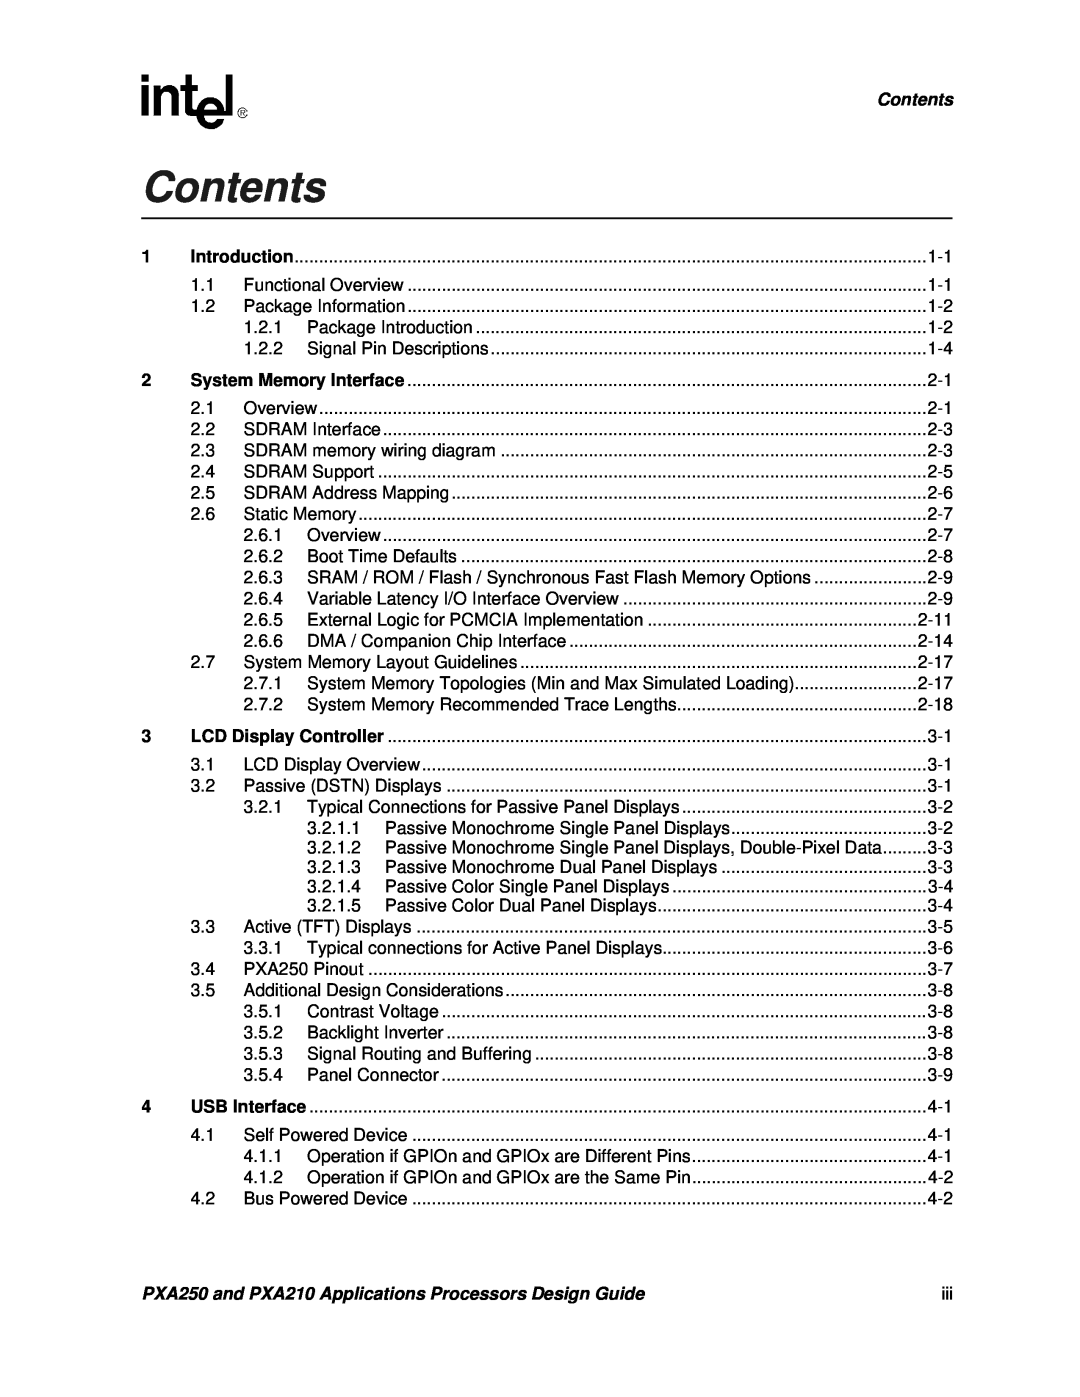 Intel manual Contents, USB Interface, PXA250 and PXA210 Applications Processors Design Guide 